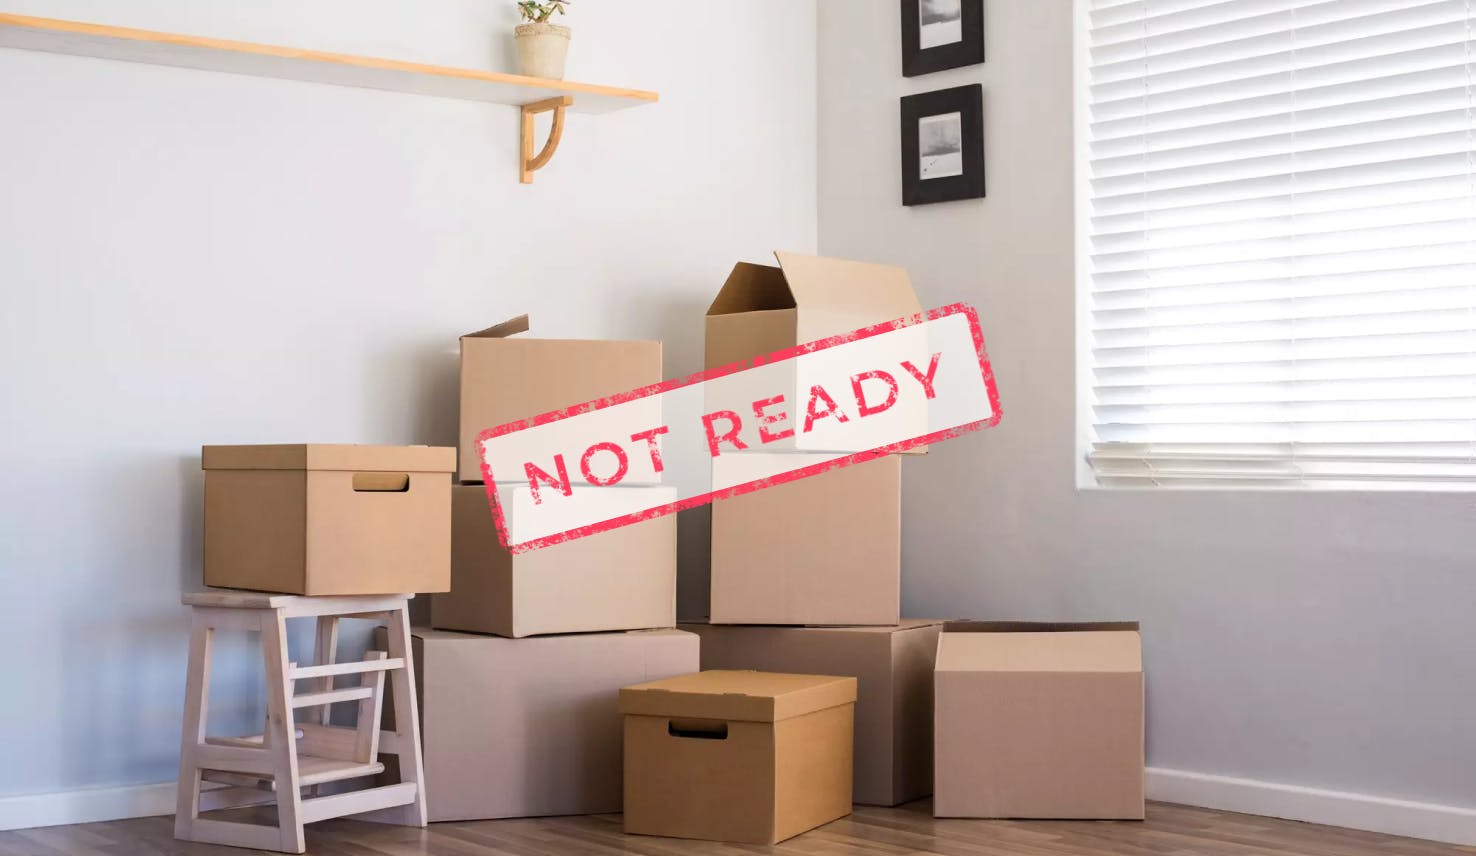 An image of moving boxes and photo frames in the corner of a house, labeled "NOT READY" as this would not suffice for a rental inspection to put your home on the market